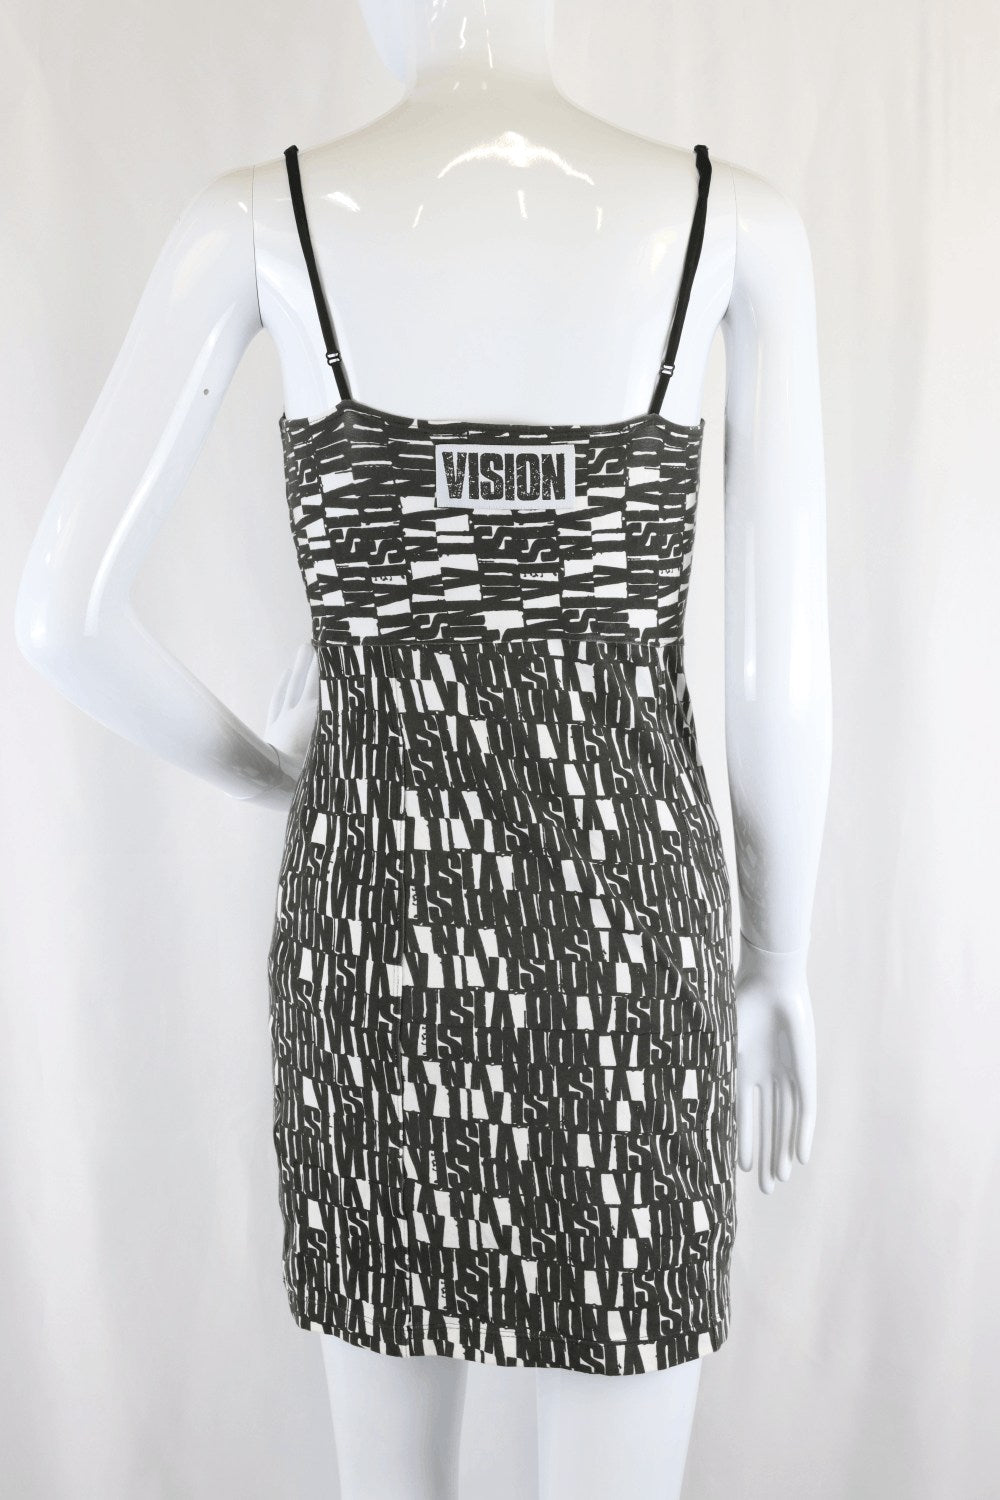 Vision Street Wear Black And White Dress S